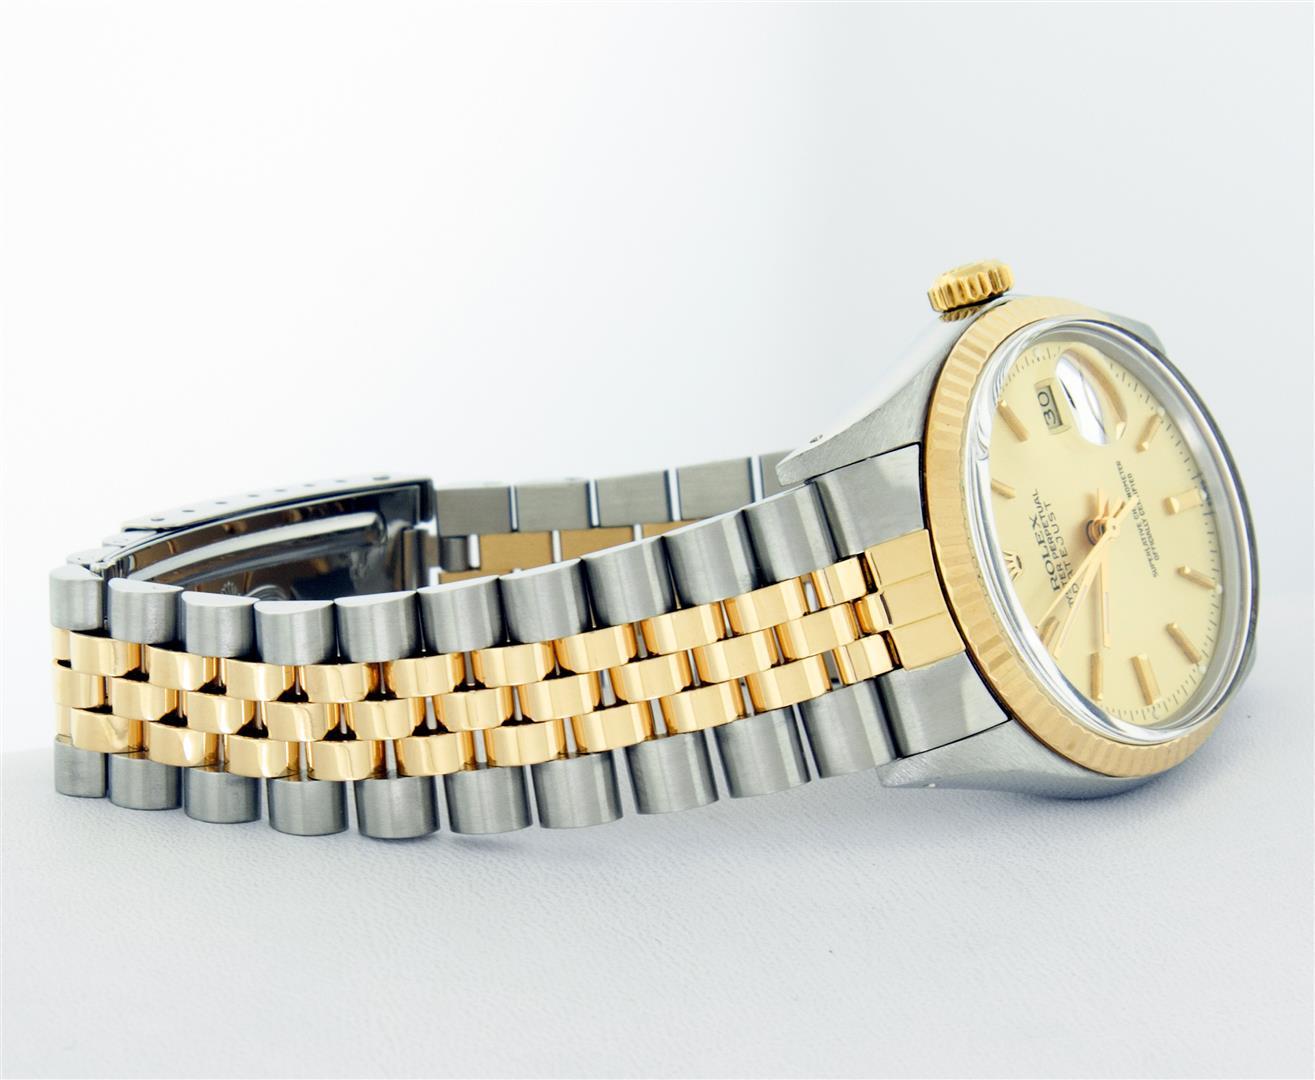 Rolex Mens 2T 14K Yellow Gold And Stainless Steel Champagne Index Datejust